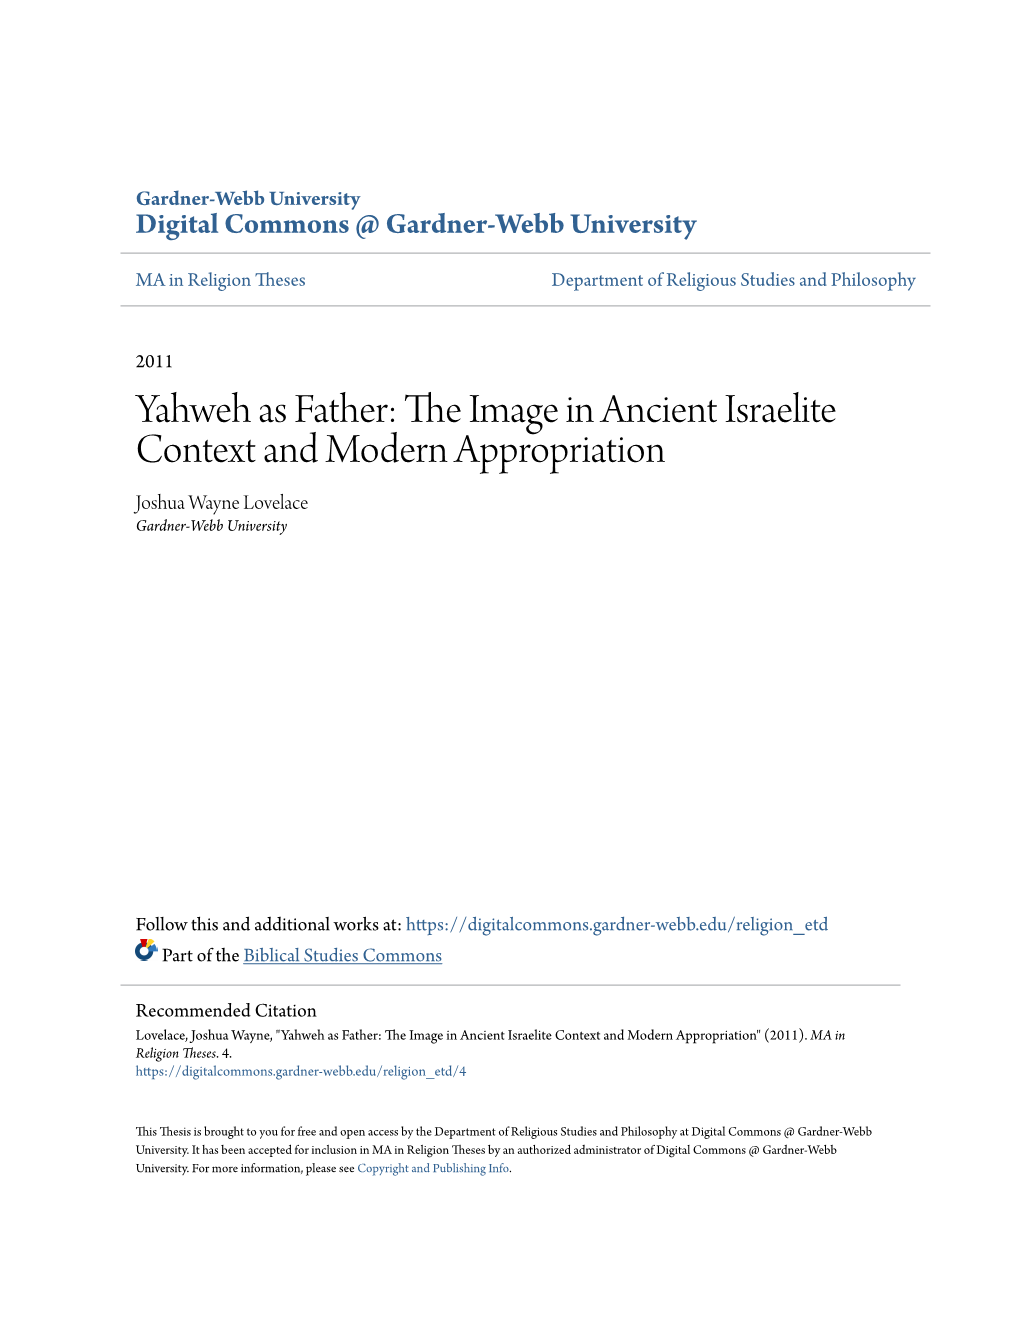 Yahweh As Father: the Mi Age in Ancient Israelite Context and Modern Appropriation Joshua Wayne Lovelace Gardner-Webb University